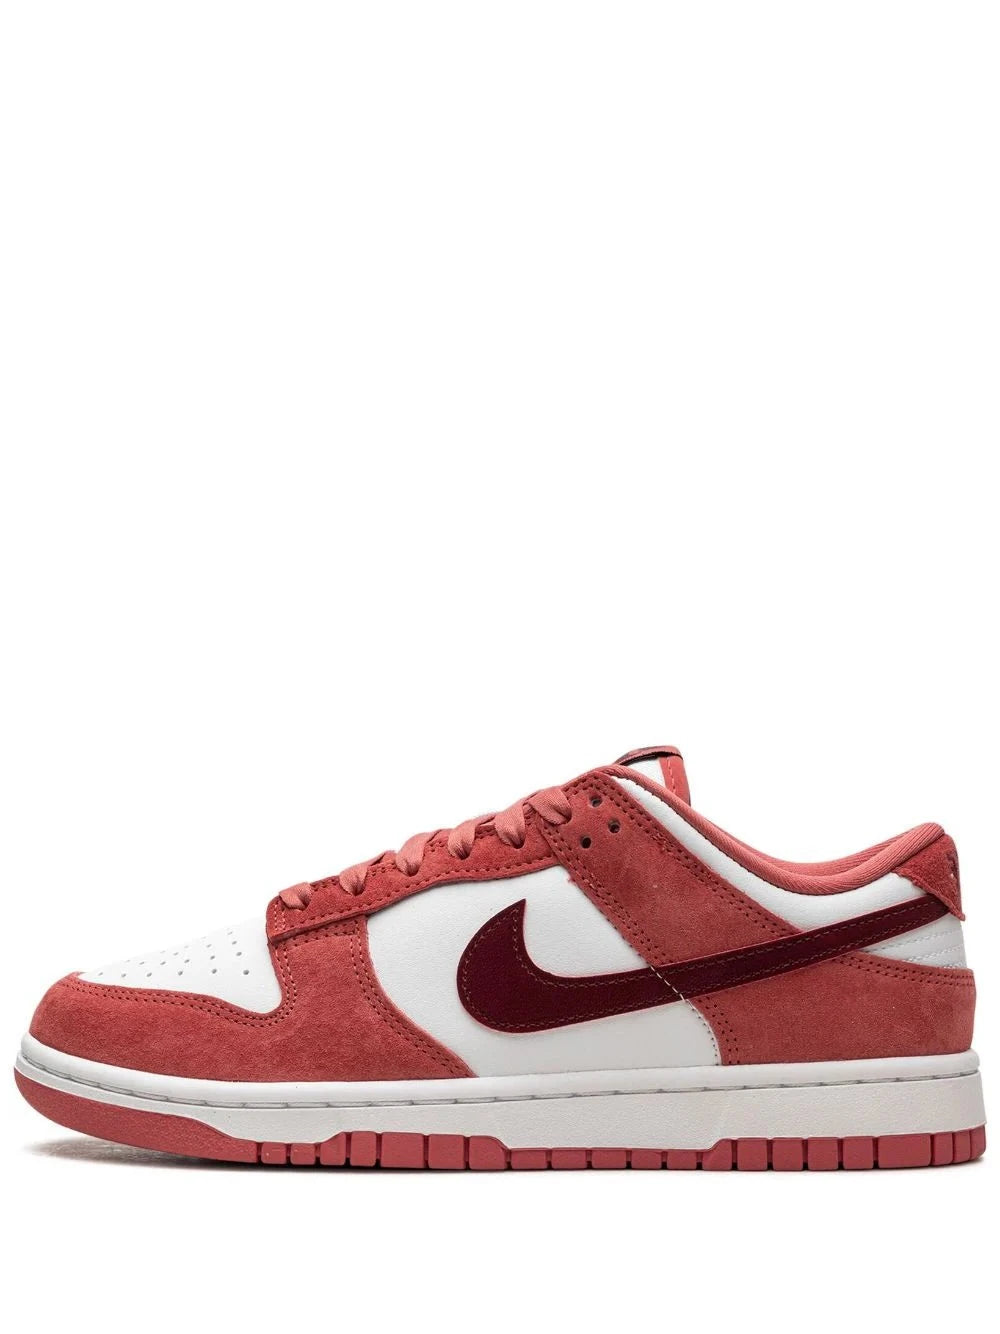 NIKE DUNK LOW - VALENTINE'S DAY